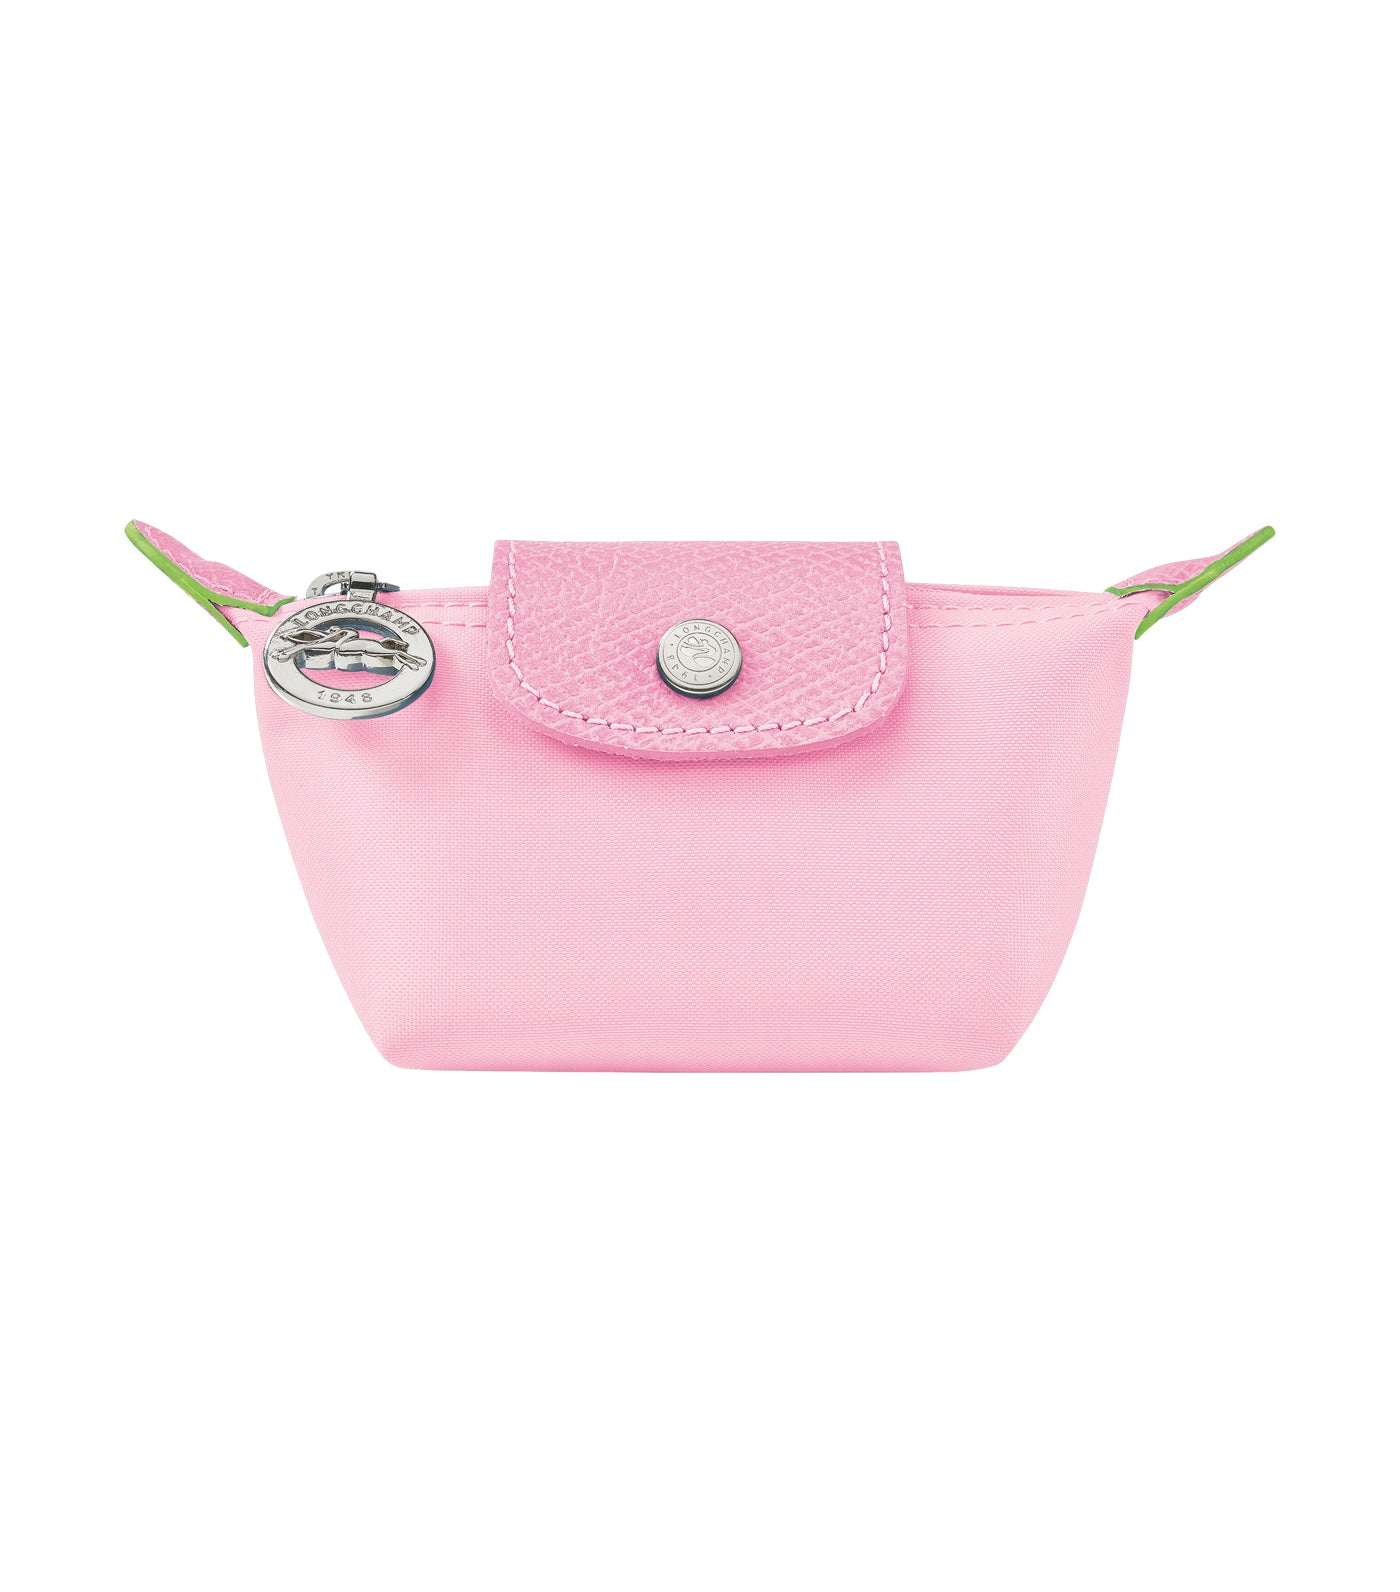 Longchamp Le Pliage Coin Purse in Pink